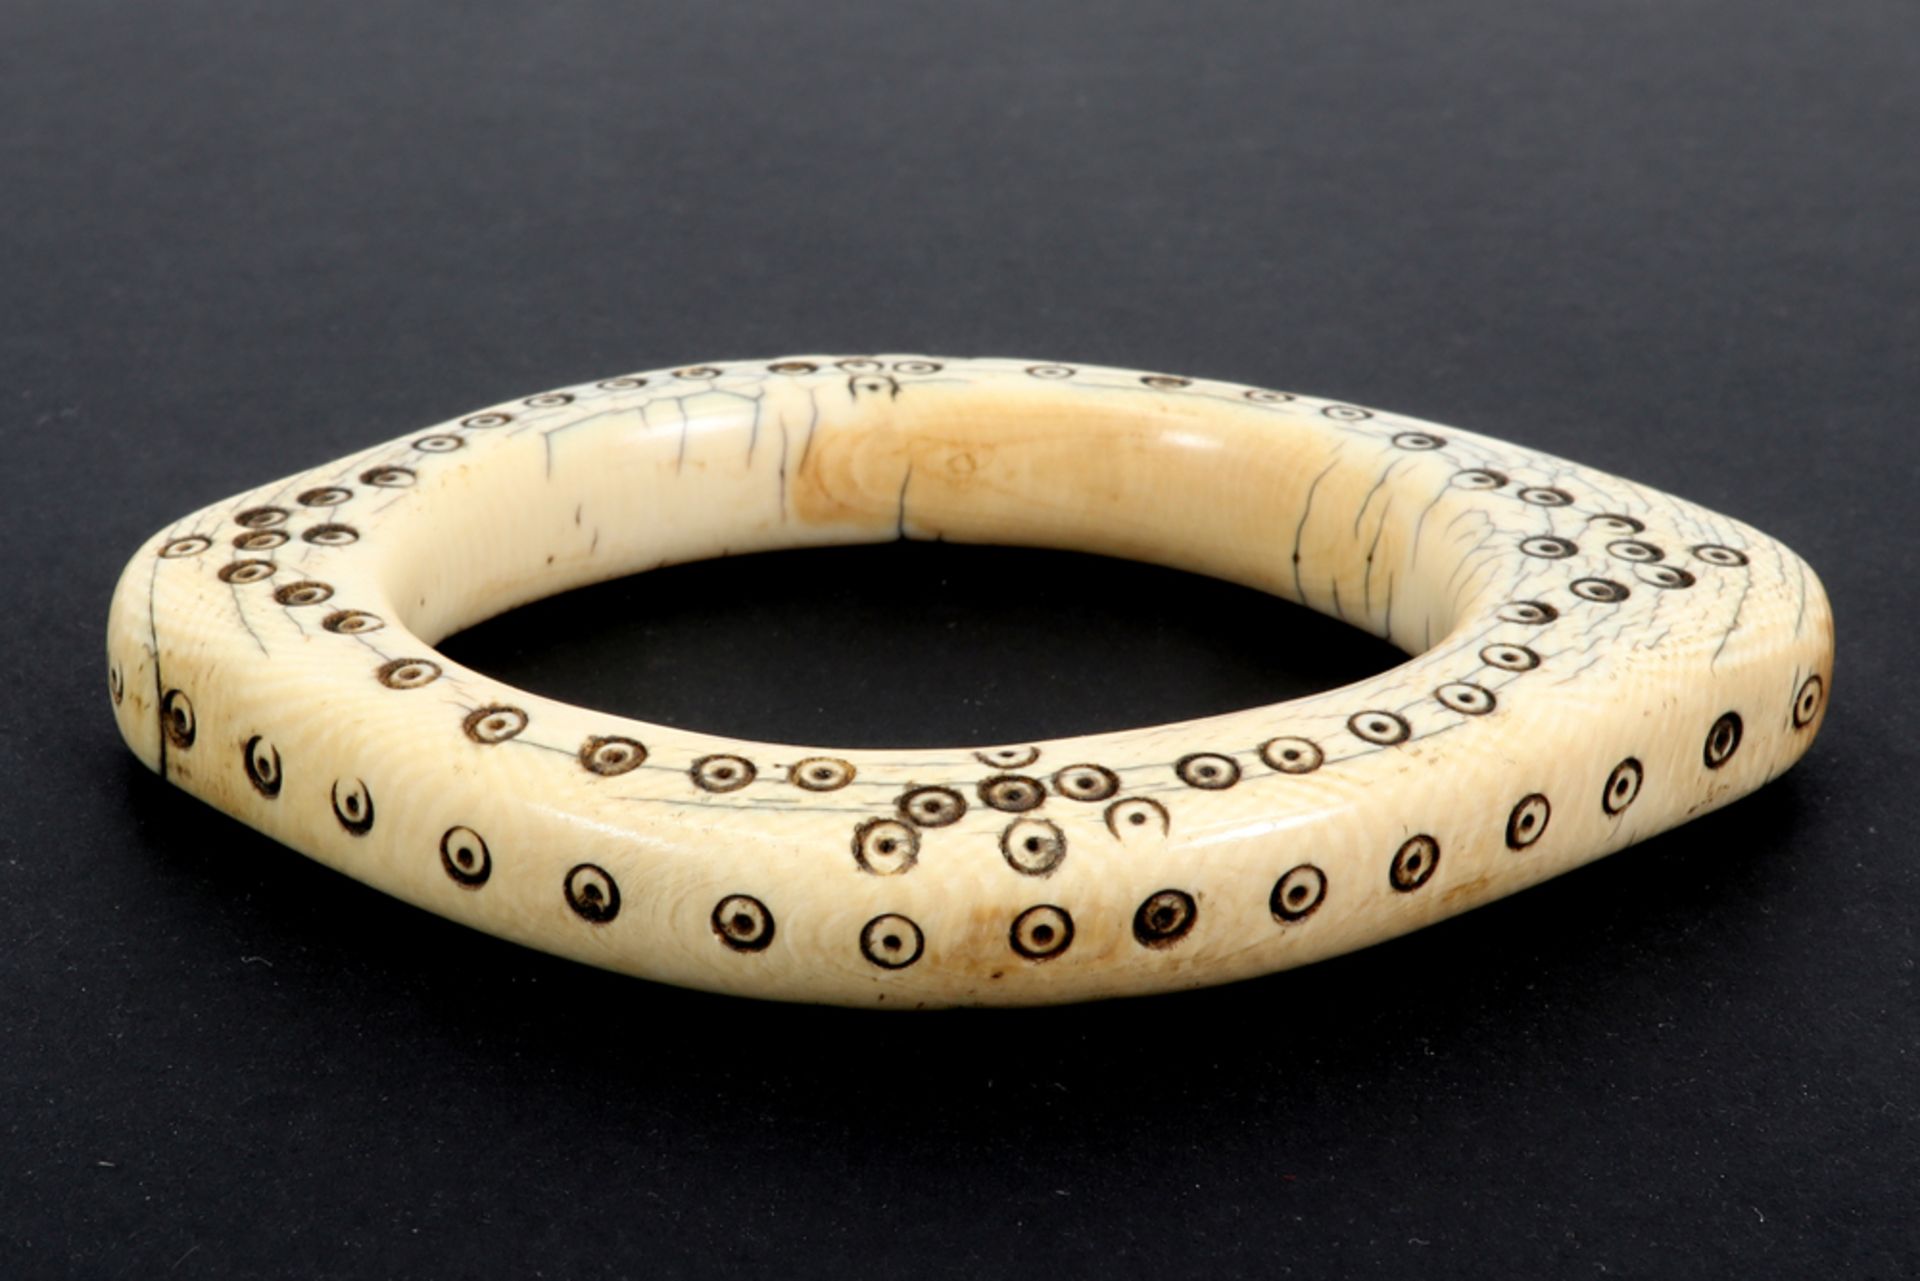 rare African Congolese 'Lega' bracelet in bone with nice patina and with a typical eye shape || - Bild 3 aus 3